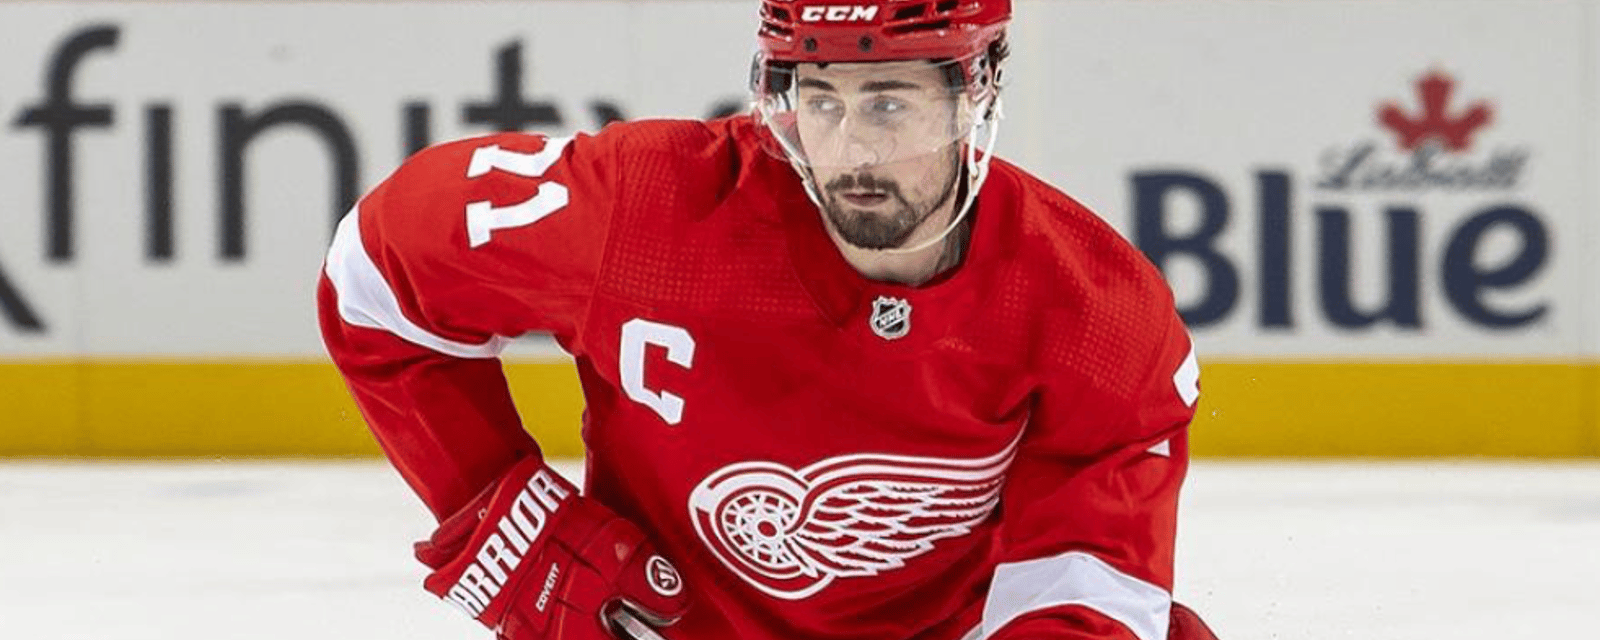 Original 6 team reportedly interested in acquiring Dylan Larkin? 